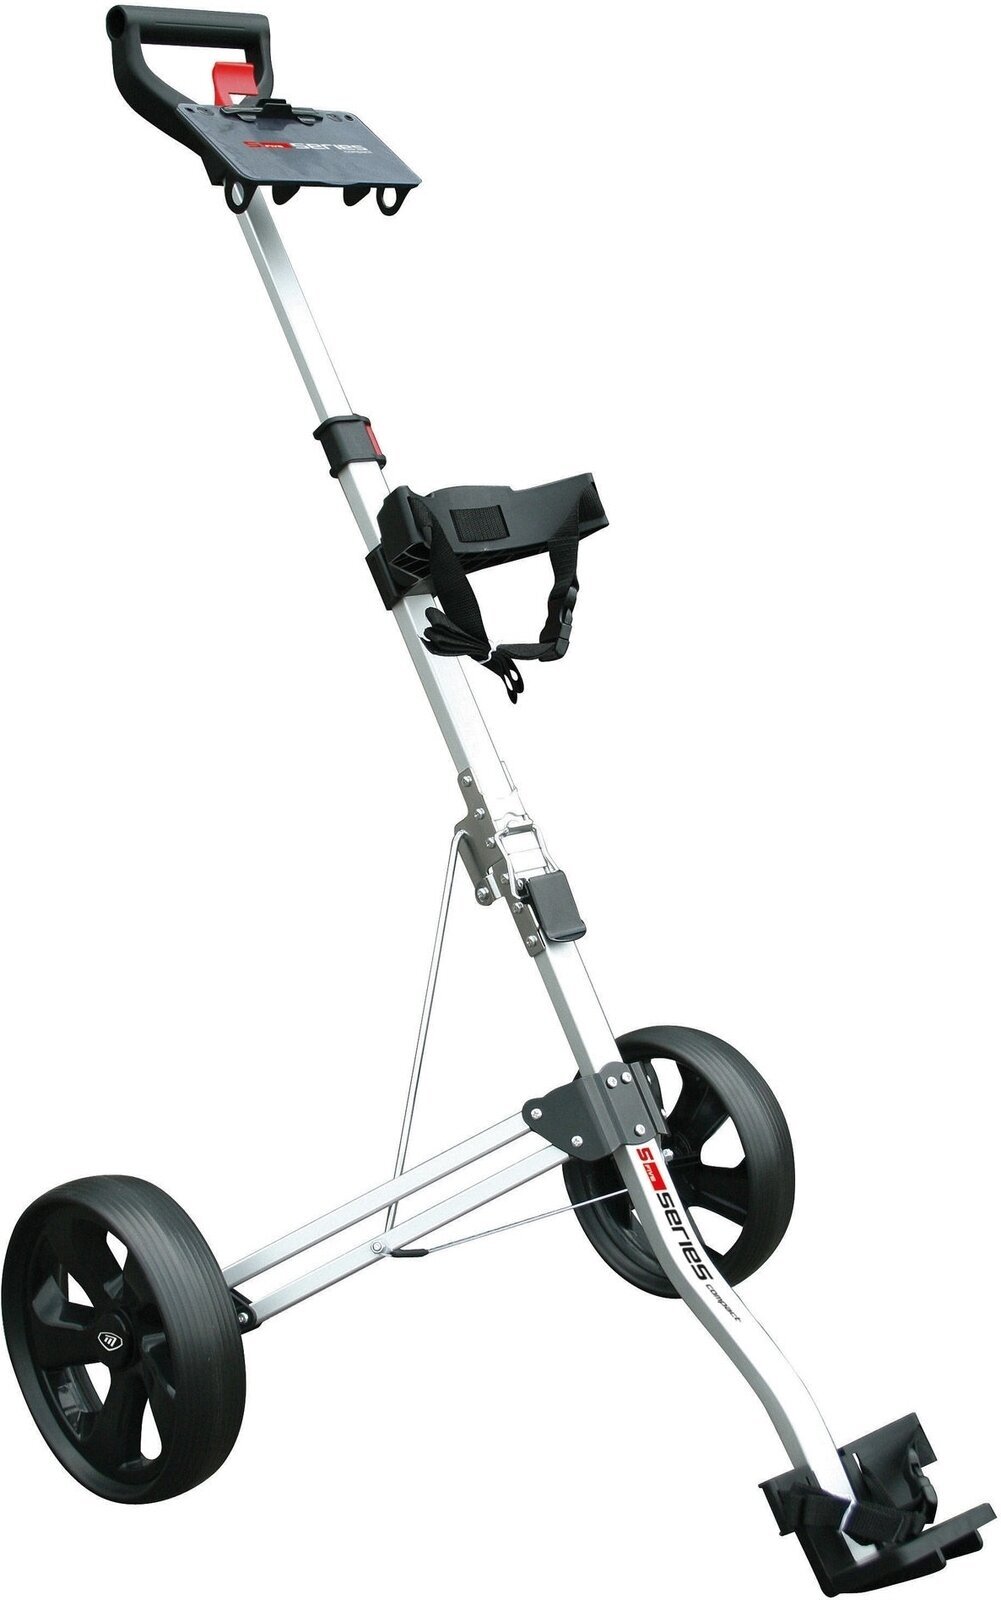 Pushtrolley Masters Golf 5 Series Compact Silver Pushtrolley